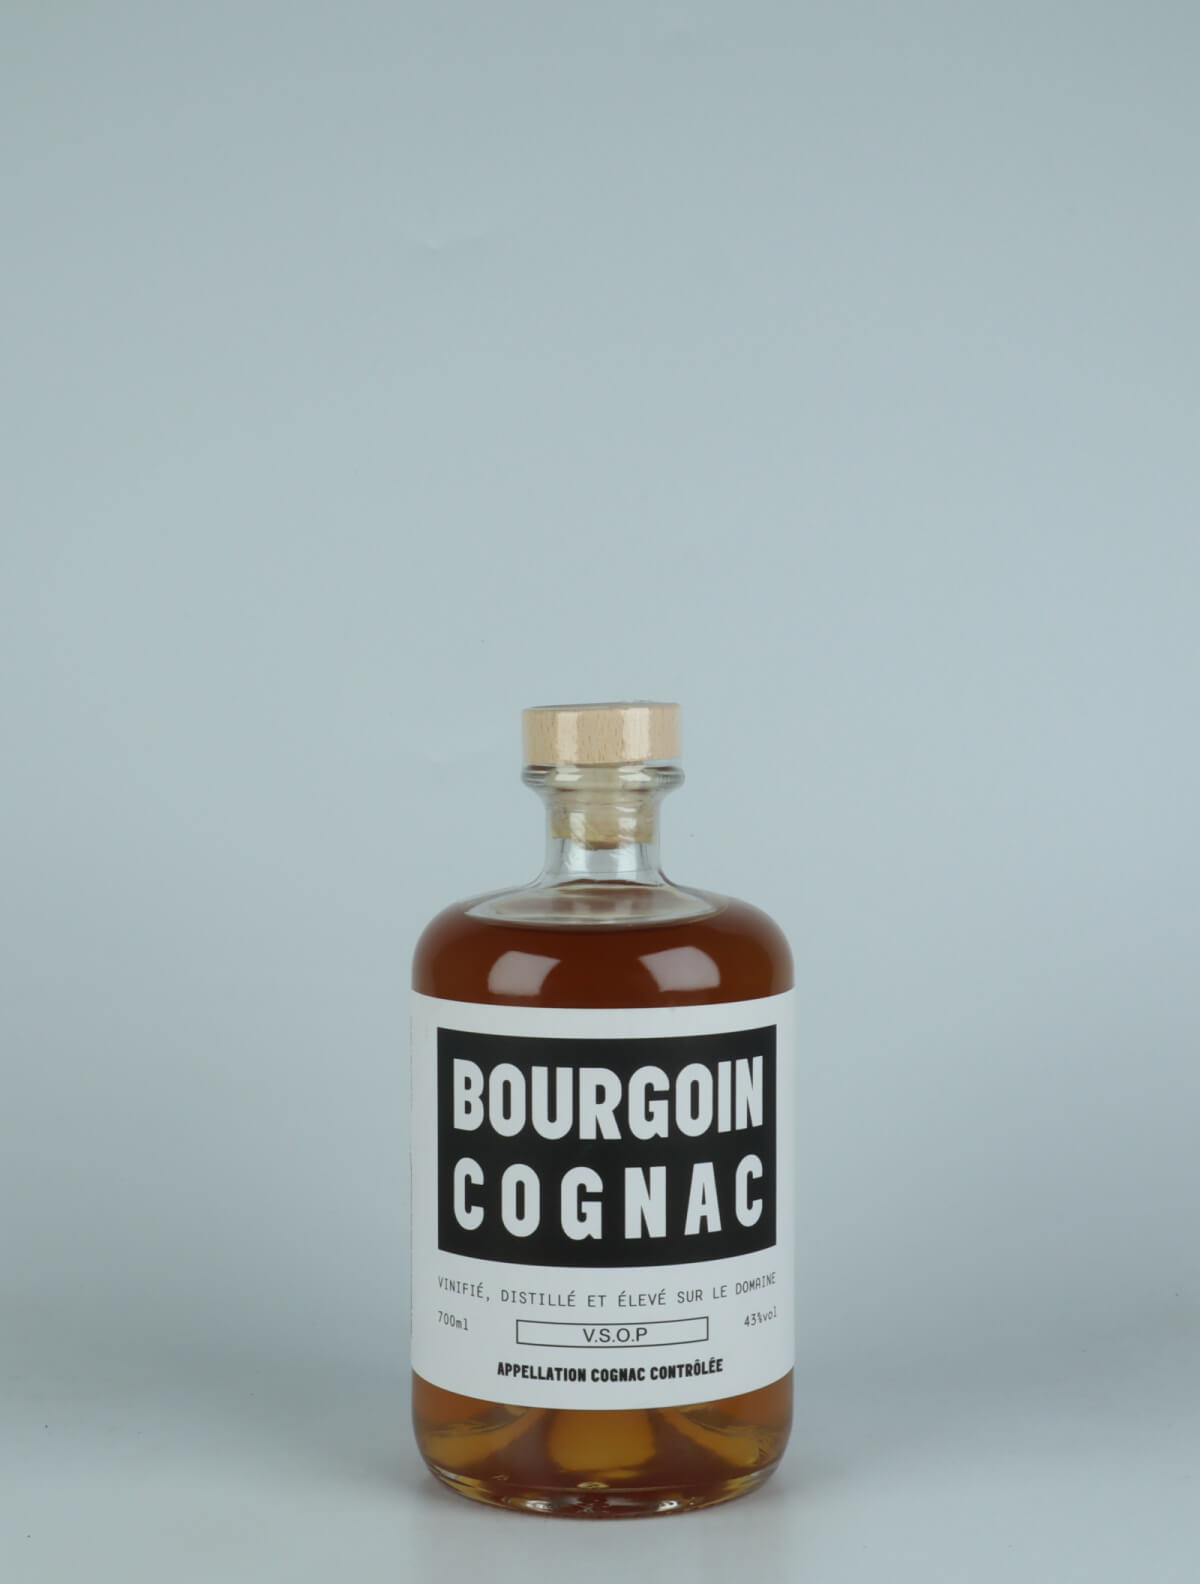 A bottle N.V. Cognac VSOP - 5 Years Old Spirits from Bourgoin Cognac, Cognac in France